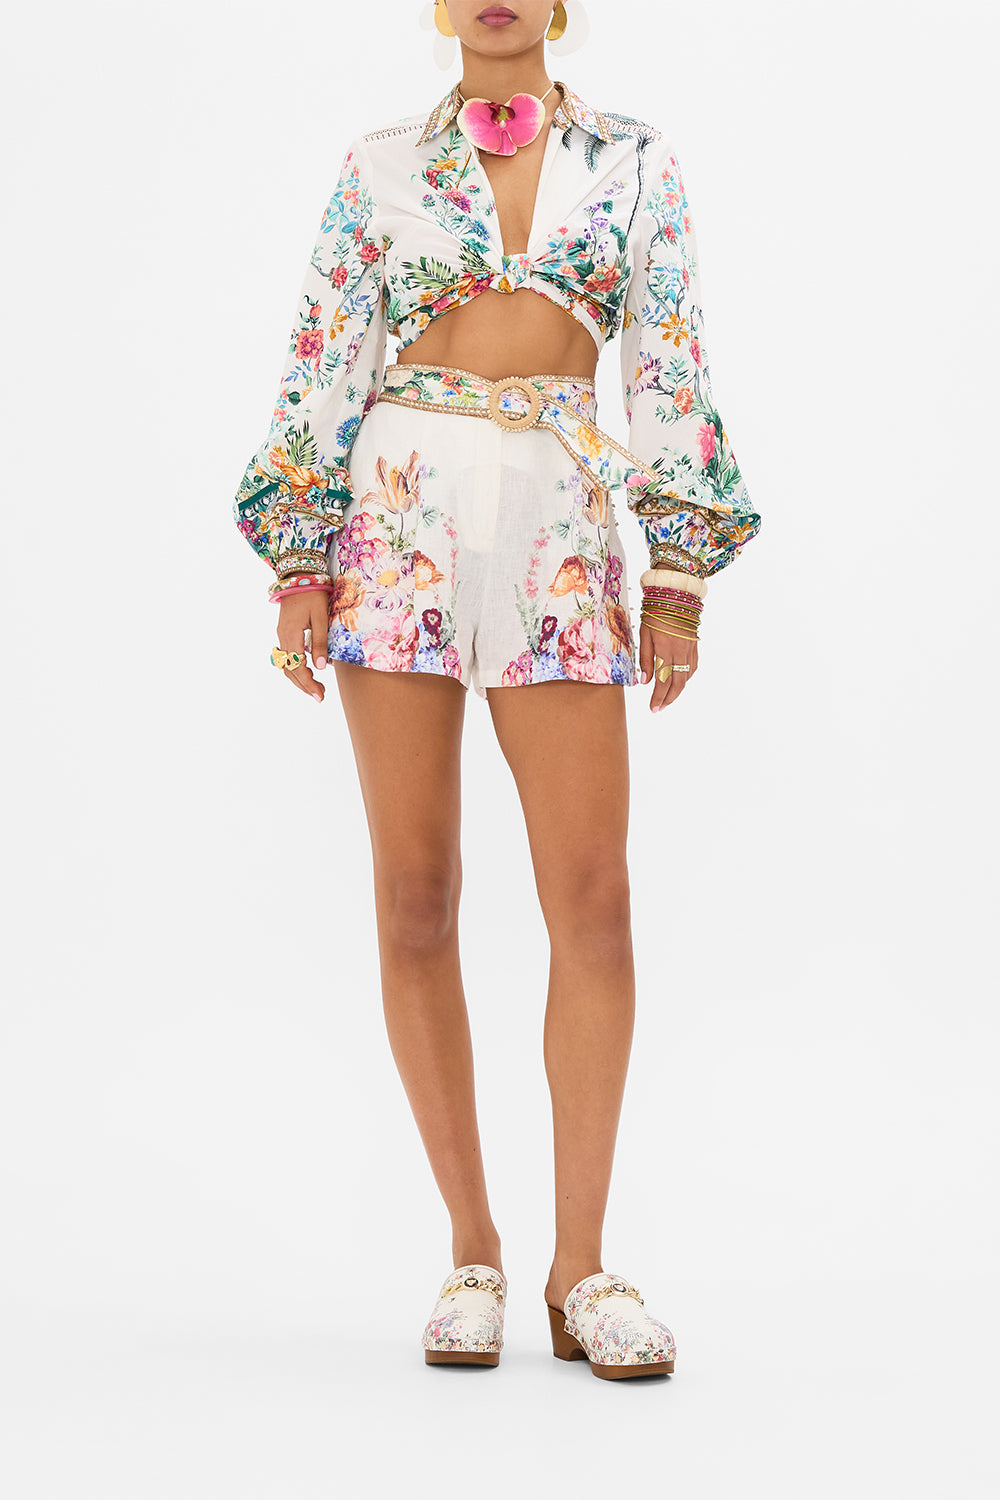 CAMILLA cropped shirt in Plumes and Parterres print